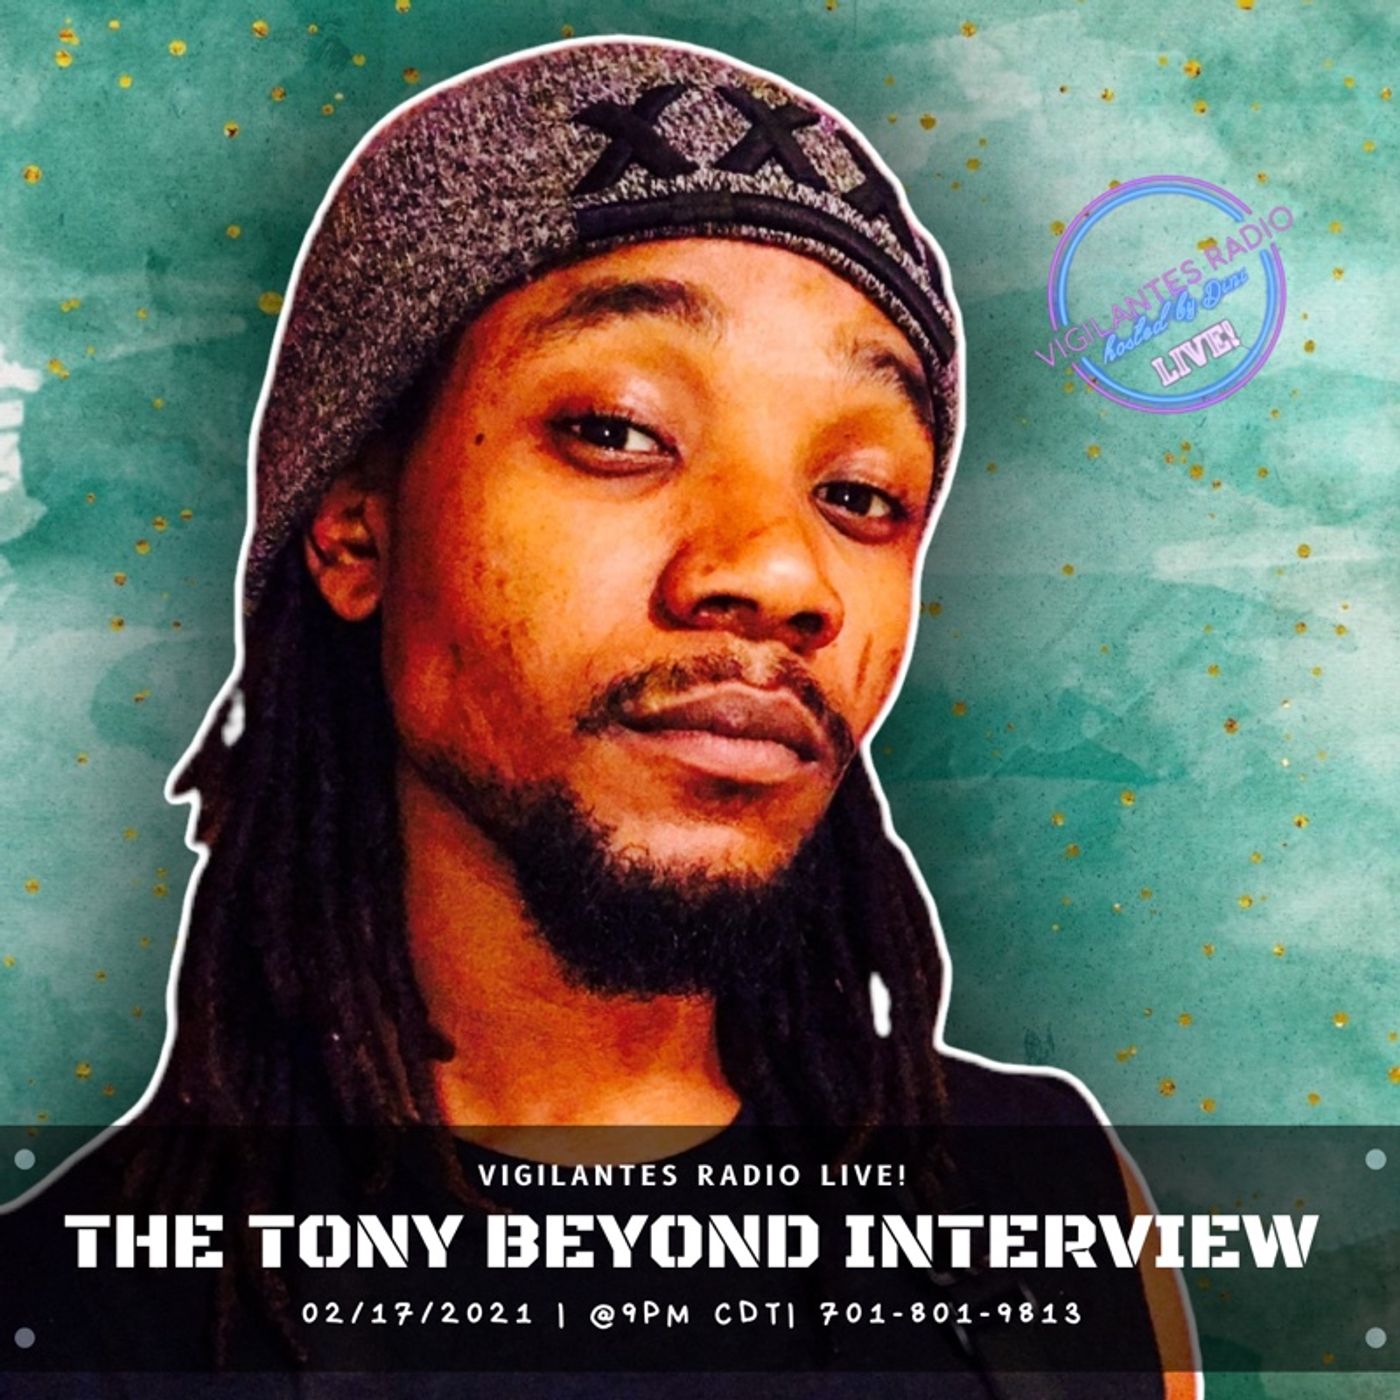 The Tony Beyond Interview. Image